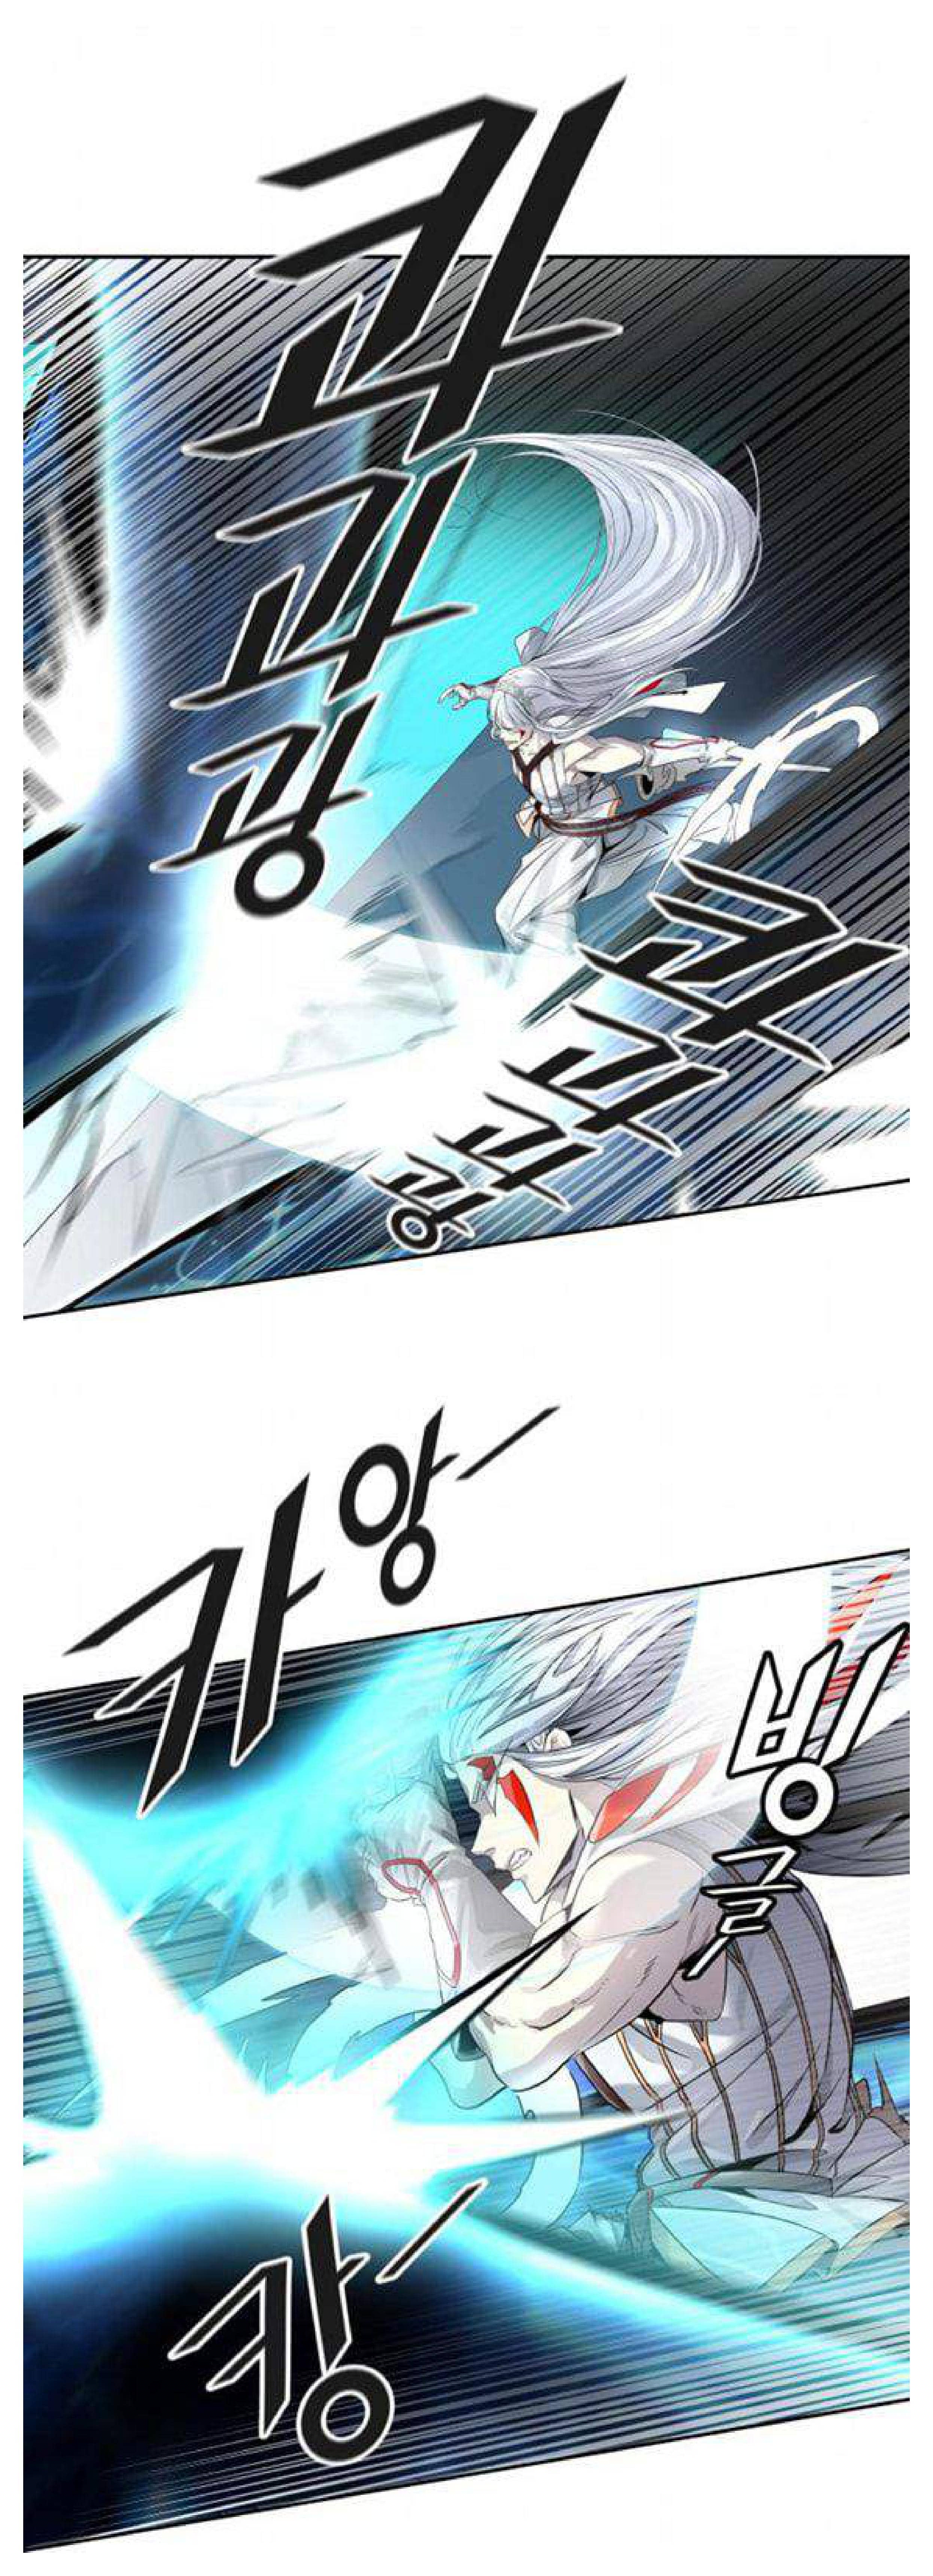 tower of god 504, tower of god 504, Read tower of god 504, tower of god 504 Manga, tower of god 504 english, tower of god 504 raw manga, tower of god 504 online, tower of god 504 high quality, tower of god 504 chapter, tower of god 504 manga scan